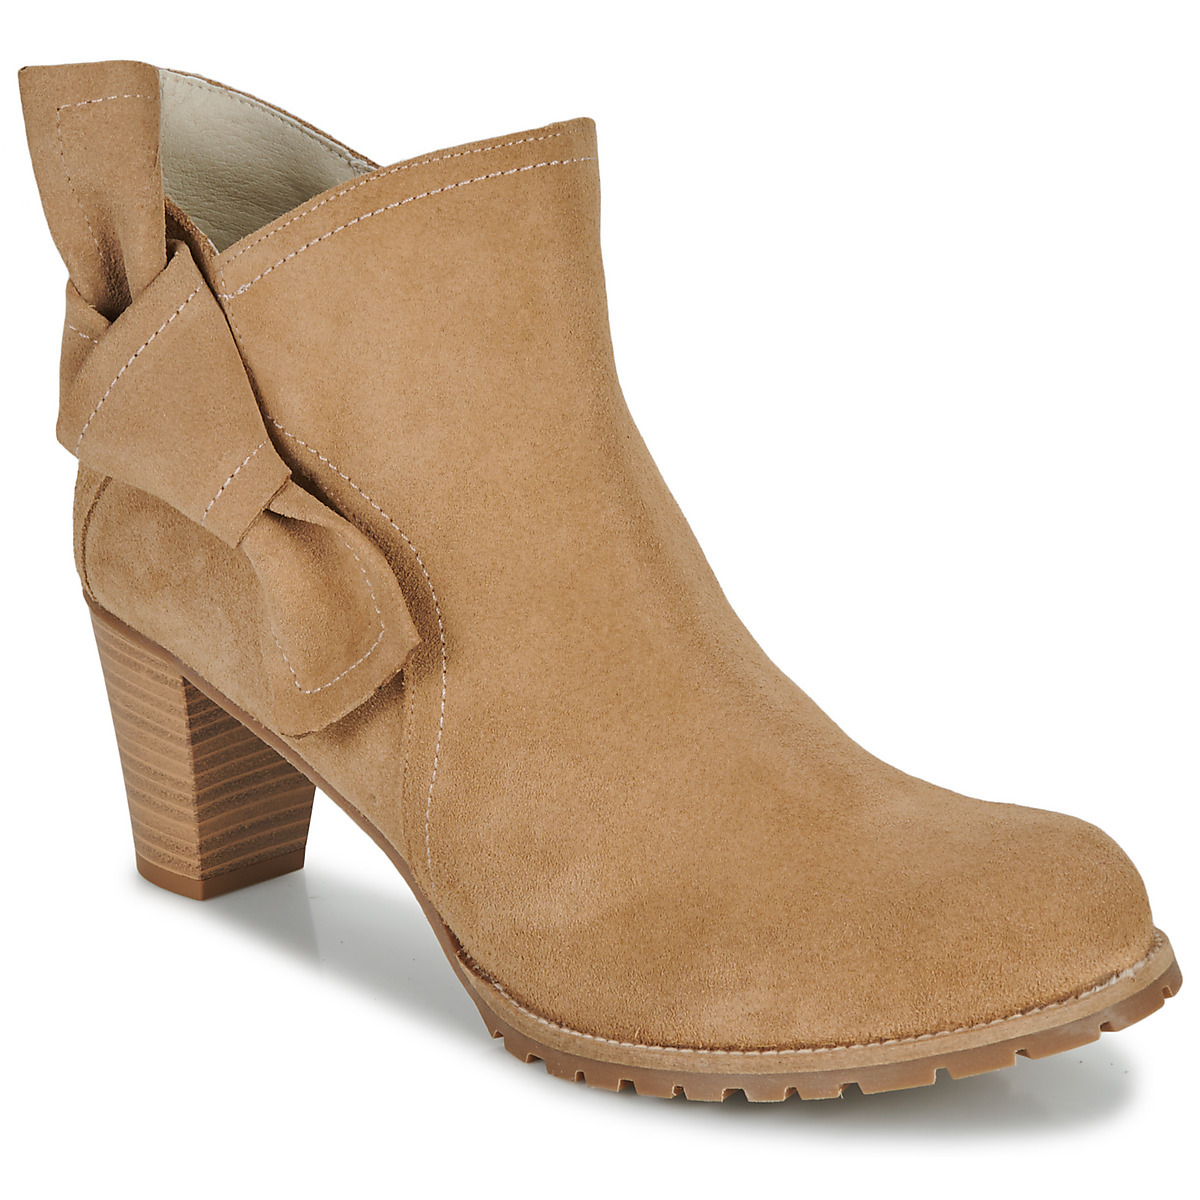 So Size Women Ankle Boots in Beige at Spartoo GOOFASH